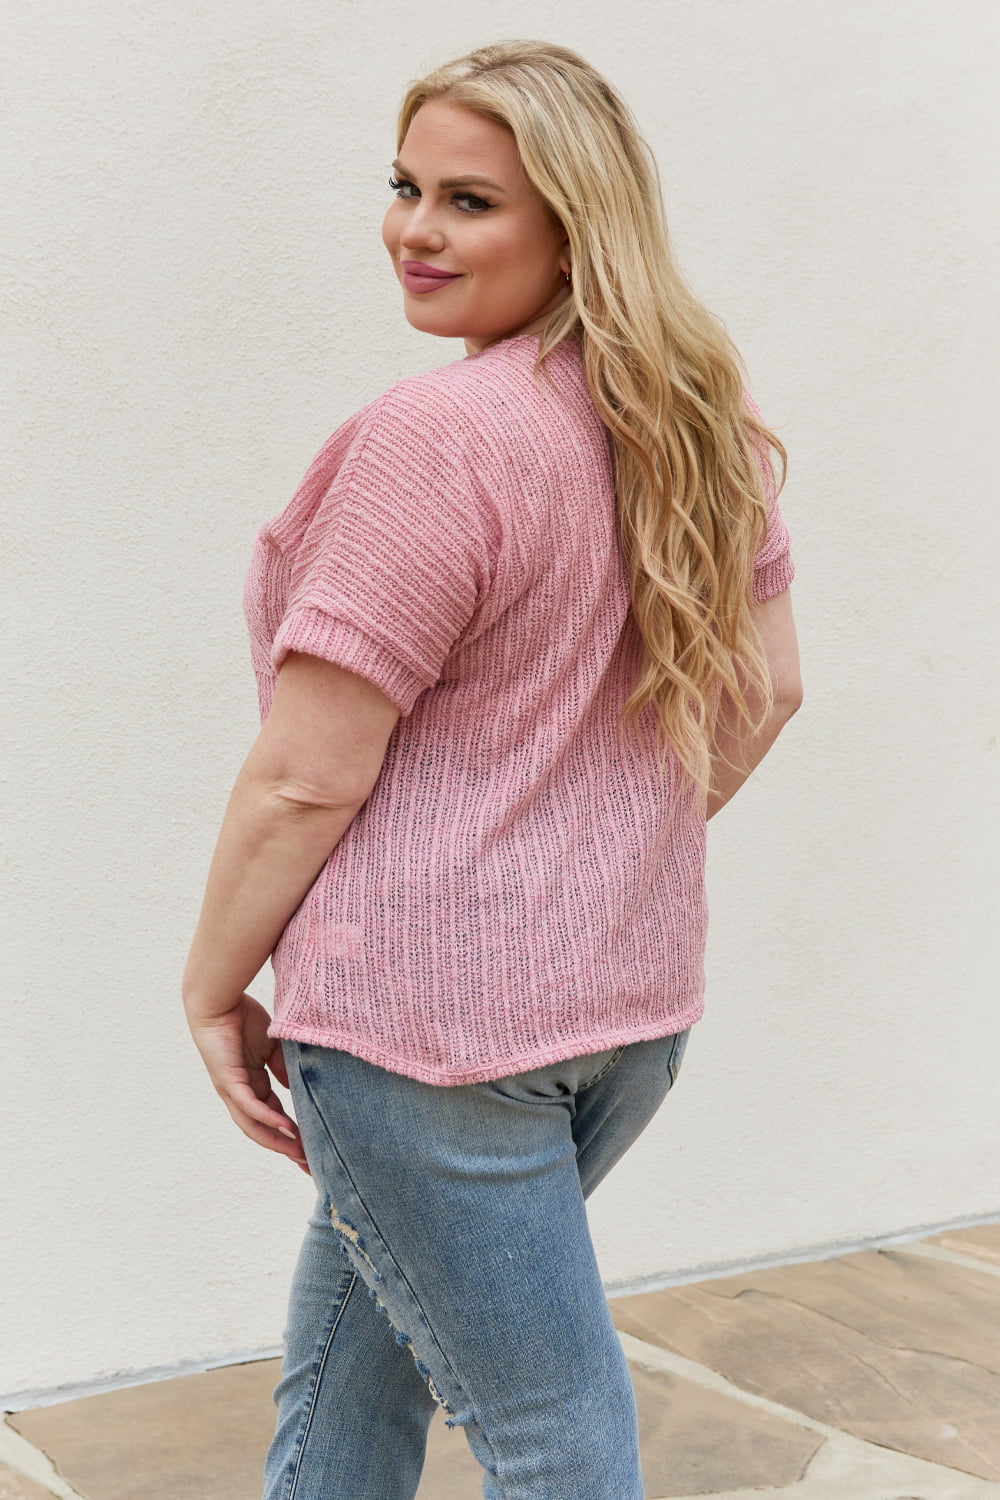 Chunky Knit Short Sleeve Top in MauveTope.Luna